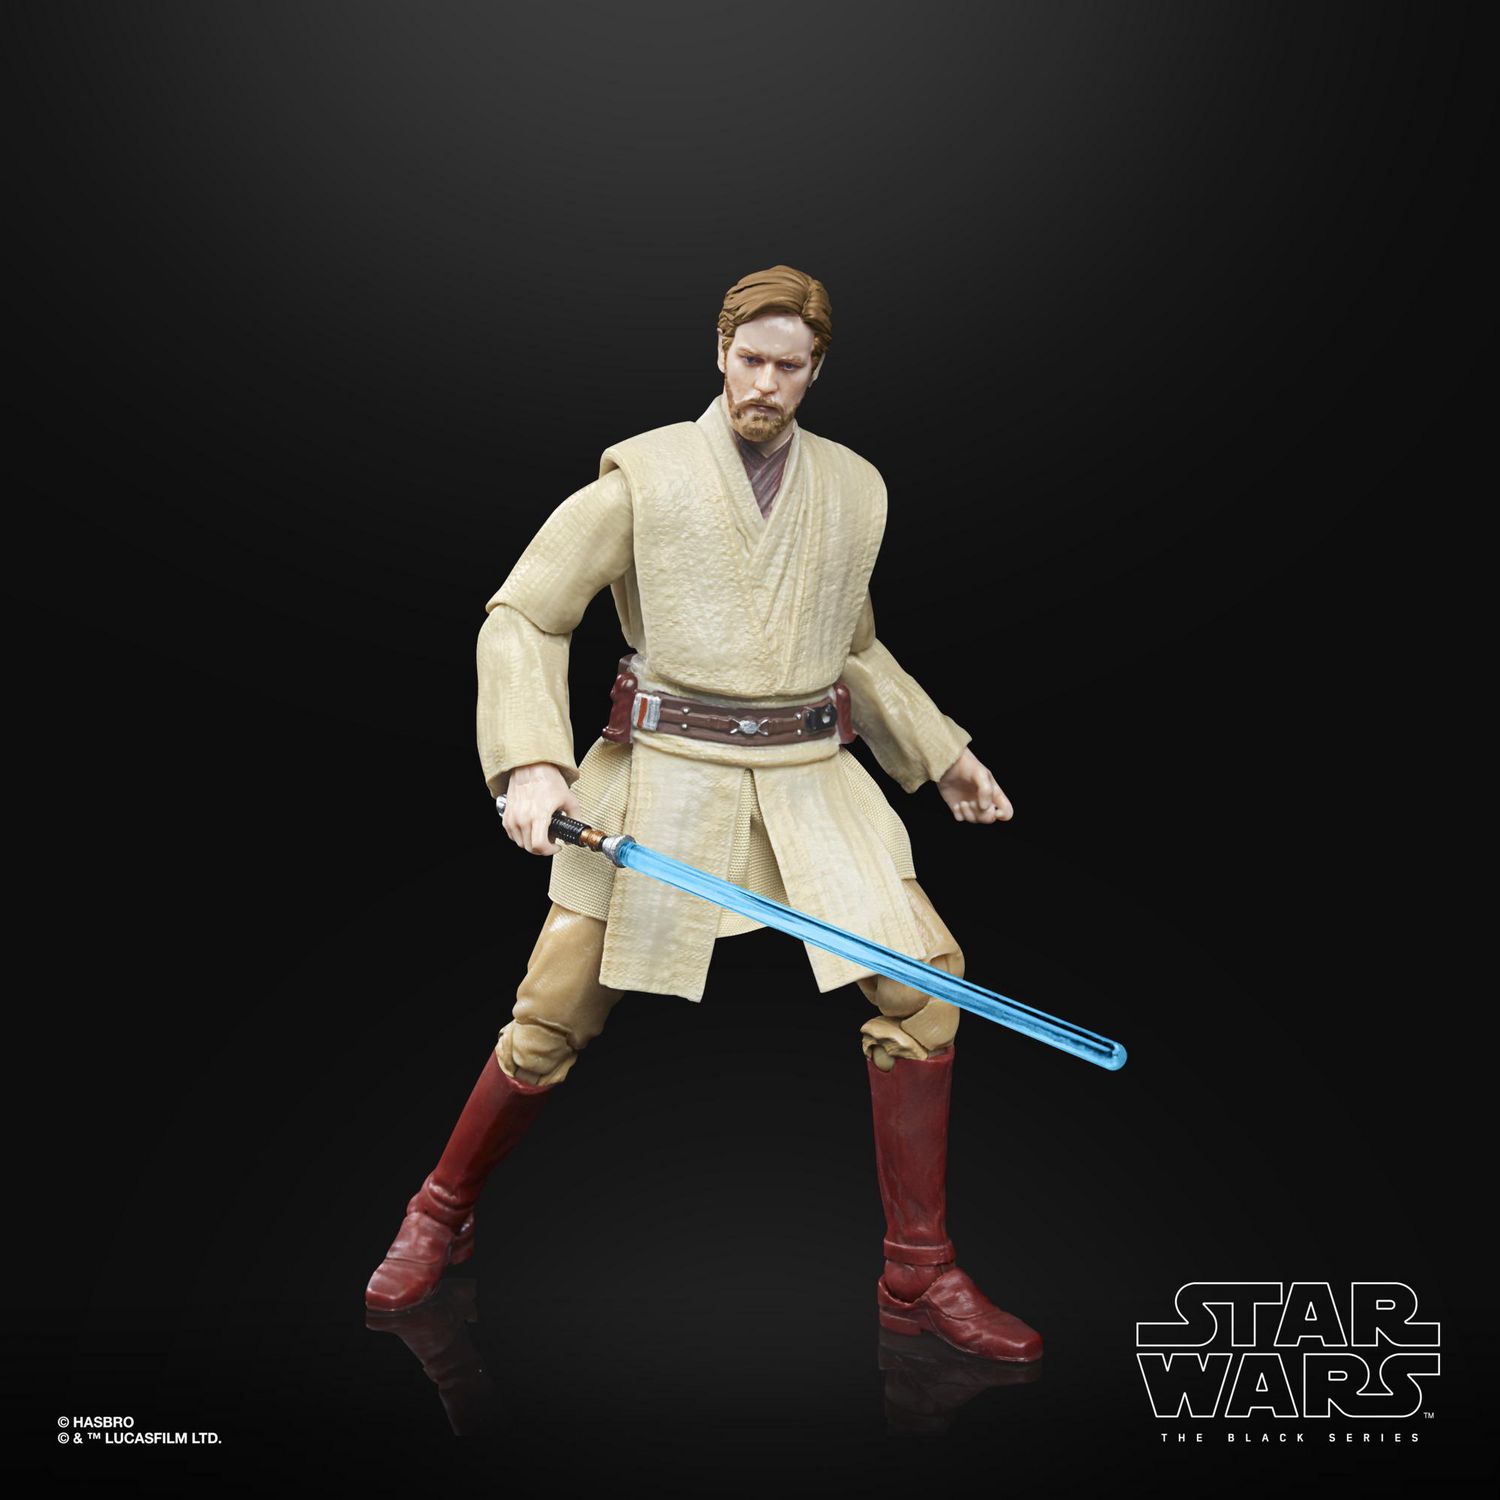 Star Wars The Black Series Archive Collection Obi-Wan Kenobi 6-Inch-Scale  Star Wars: Revenge of the Sith Lucasfilm 50th Anniversary Figure